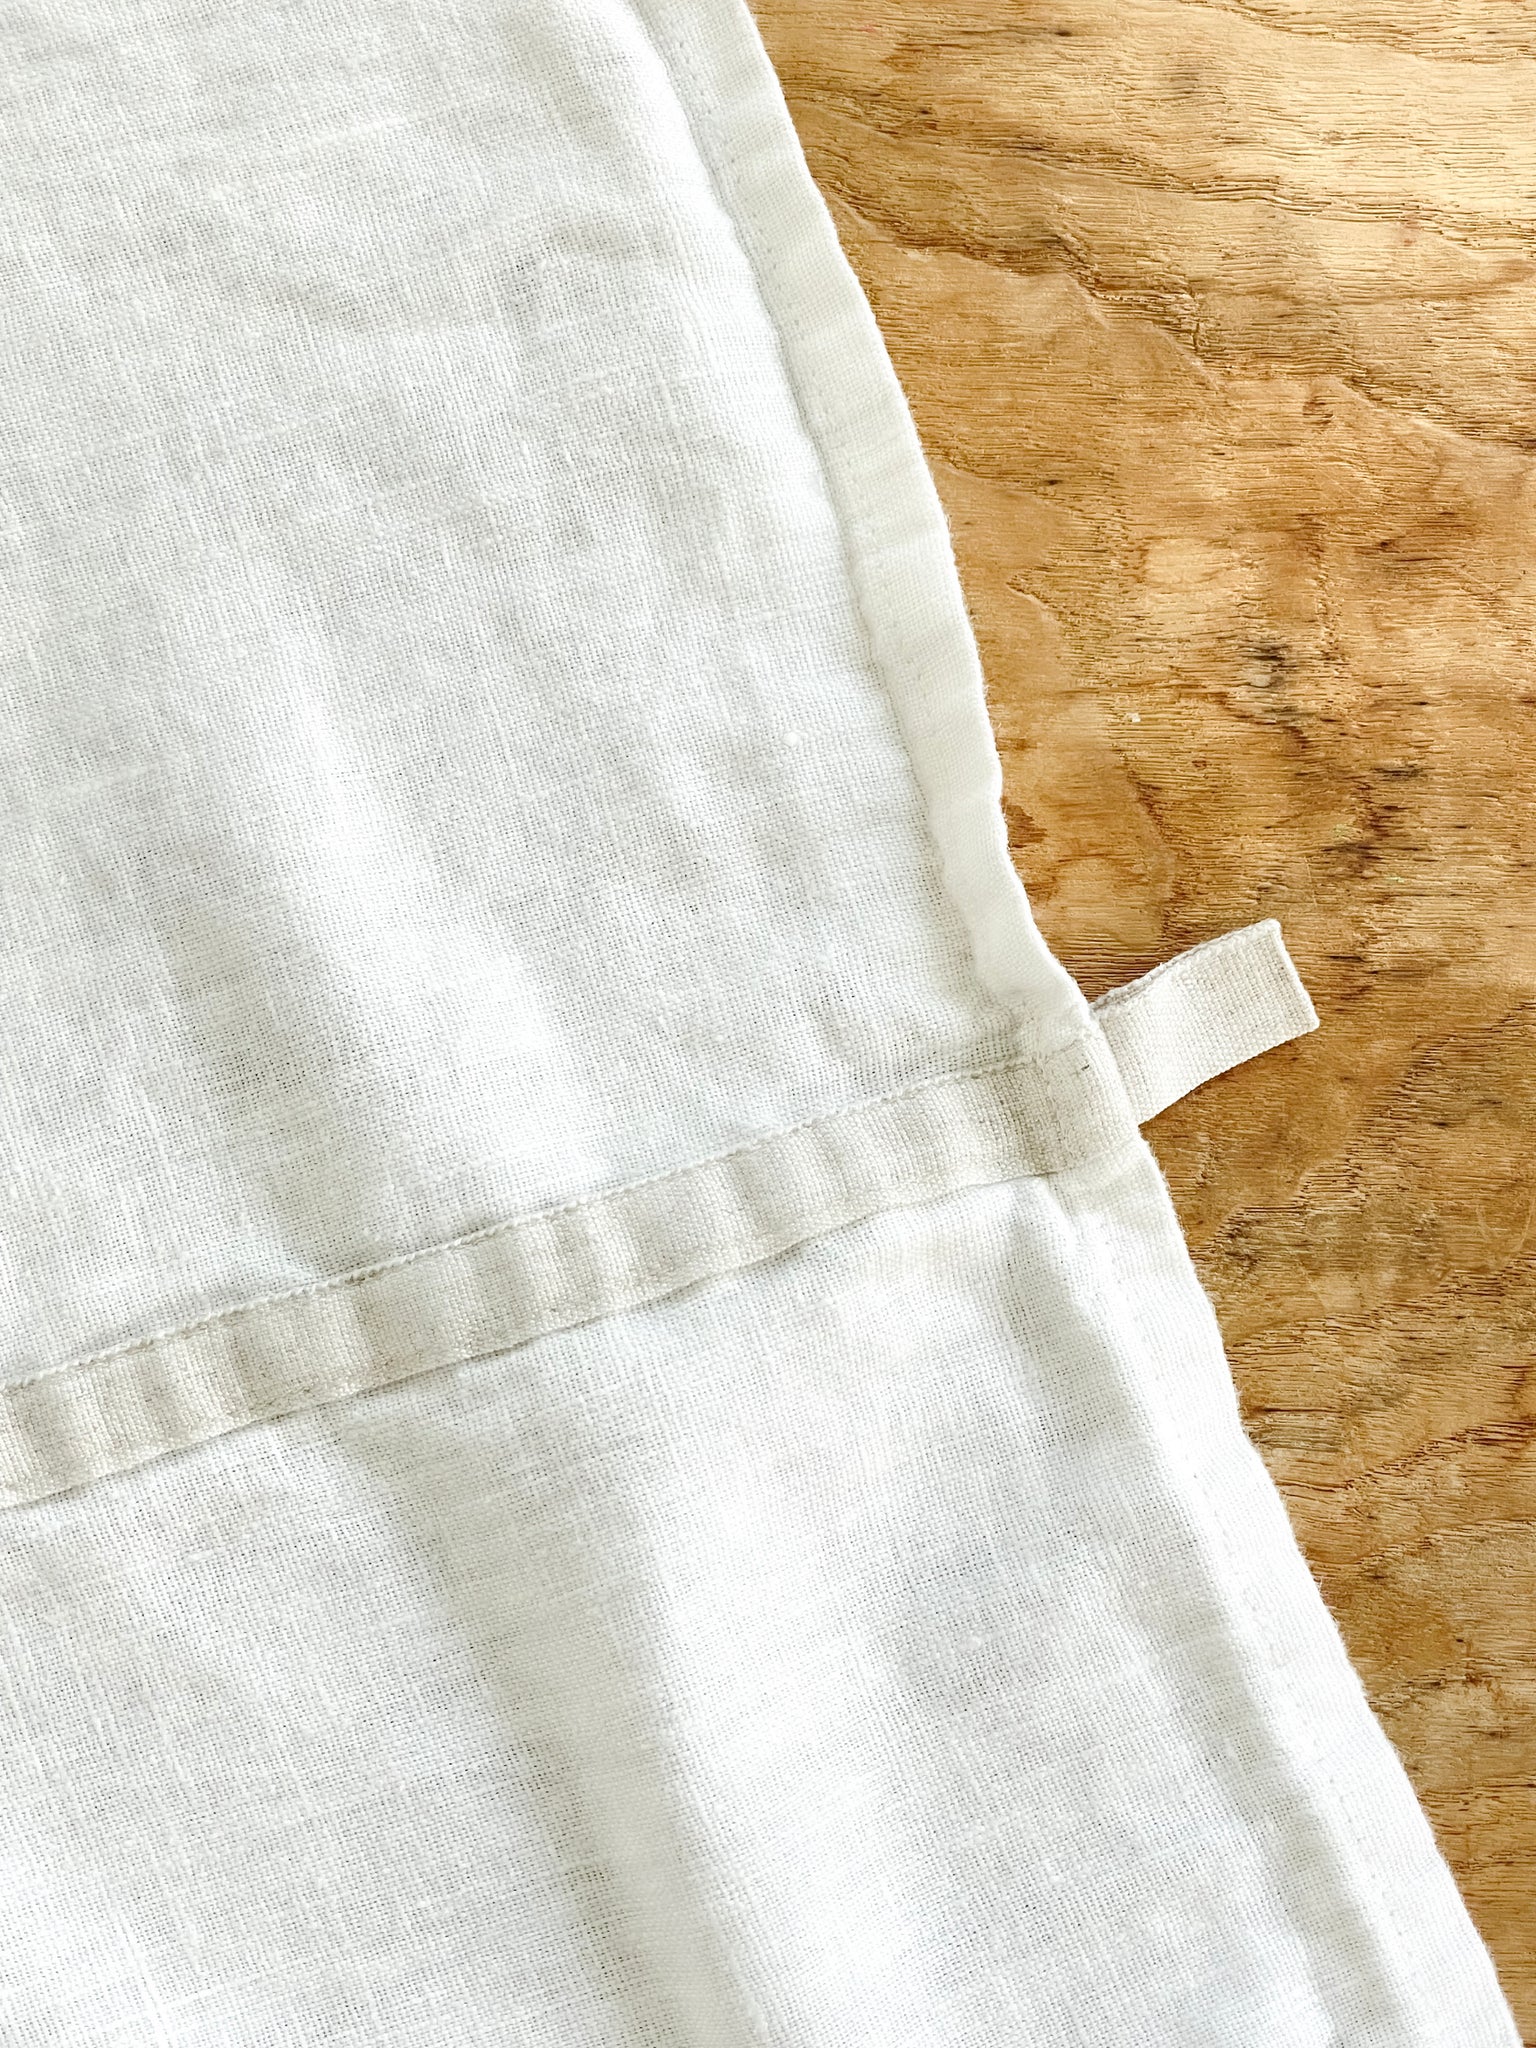 Gather and Dry 100% flax linen dish towels, eco friendly kitchen , hand towels